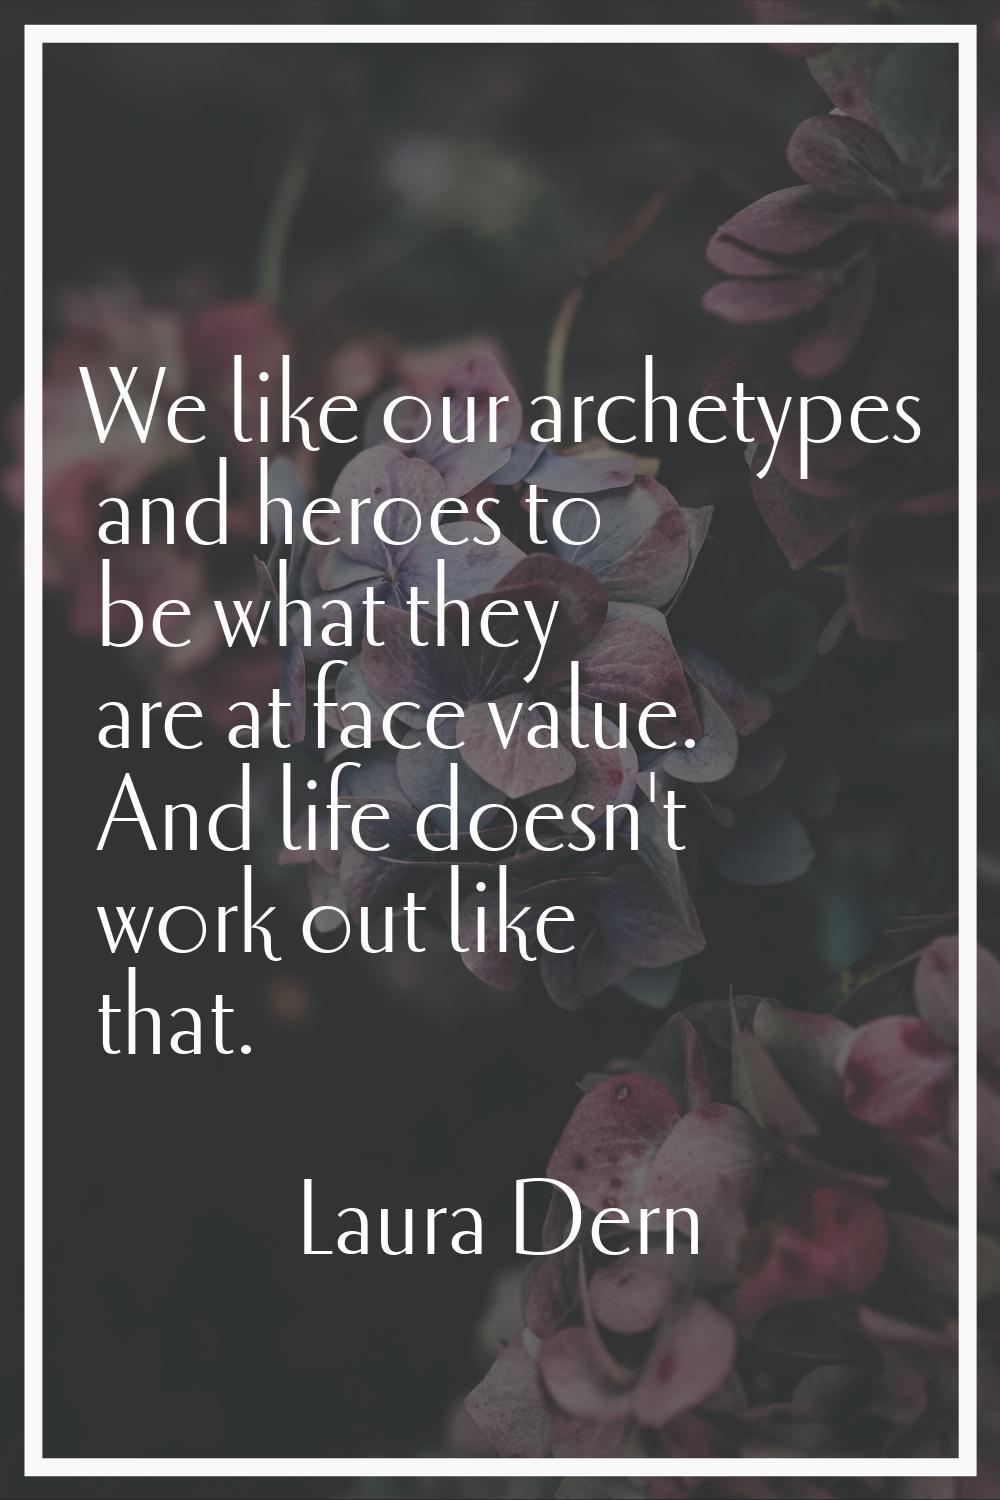 We like our archetypes and heroes to be what they are at face value. And life doesn't work out like